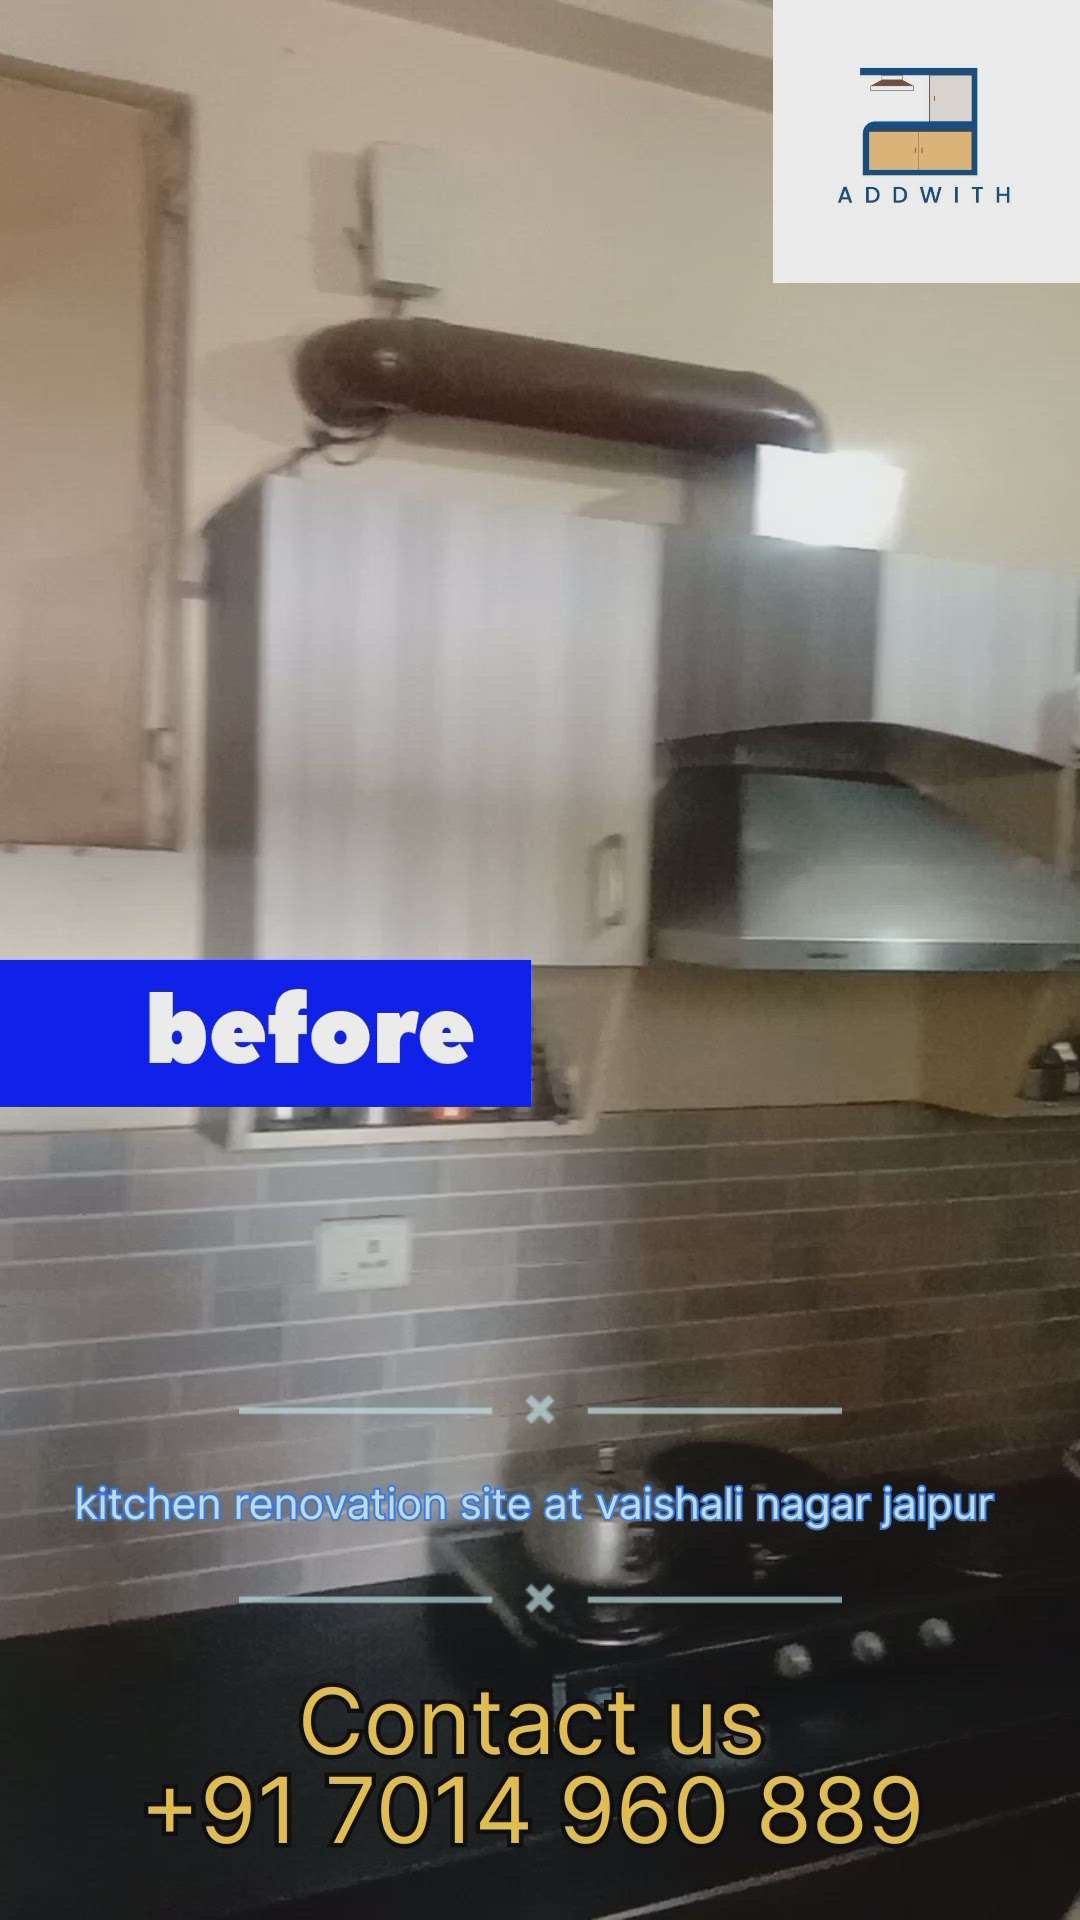 kitchen renovation in progress at vaishali nagar 
Dm for price 
#addwith  (The Art of Kitchen) deals with all kinds of Modular kitchen & Furniture, Doors, Windows - Get Beautiful designs of Home Furniture, Office Furniture, Sofa Set, Bed, Chairs, Dining Table, Almirahs, Lockers, Cupboards, Mattress, (All Brands) modular kitchen furniture and Interior Decorator at very Competitive prices with Best Quality.
Note - Delivery facilities are also available 
DM me if you want to design your Kitchen & home
wa.me/+917014960889 
#modularkitchen #interiordesign #kitchen #kitchendesign #homedecor  #Addwith #interior #KitchenRenovation #homerenovation  #interiordesigner #kitchencabinets #furniture #modularhomekitchen  #design  #modular #modularkitchens #cabinets #decor #interiors #homedesign #modularfurniture #ModularKitcheninJaipur #furnituredesign #homeinterior #kitchenremodel #kitchenideas  #NewAatishMarket #modulardesign #modularkitchenideas #modularkitcheninjaipur #homedecor #modularhomekitche